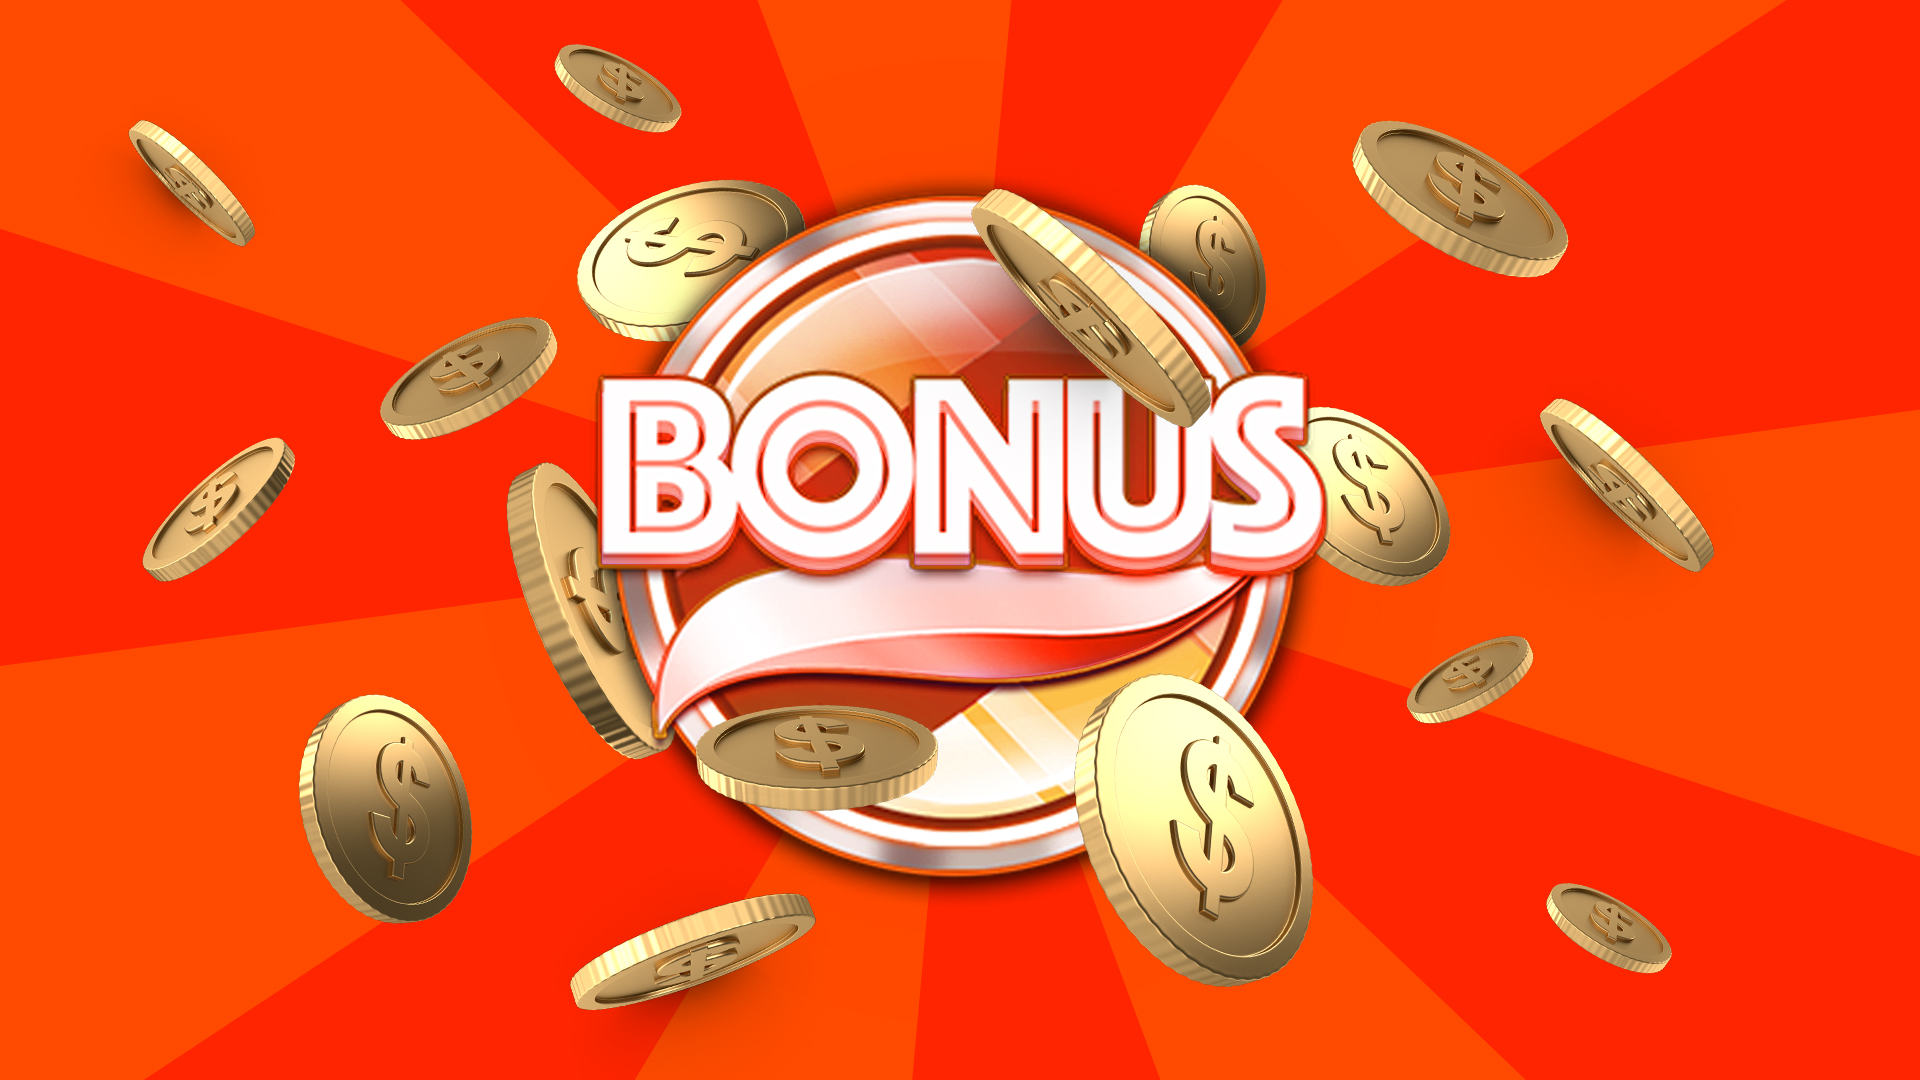 A symbol that says BONUS in block letters, with gold coins floating around it, on an orange background.